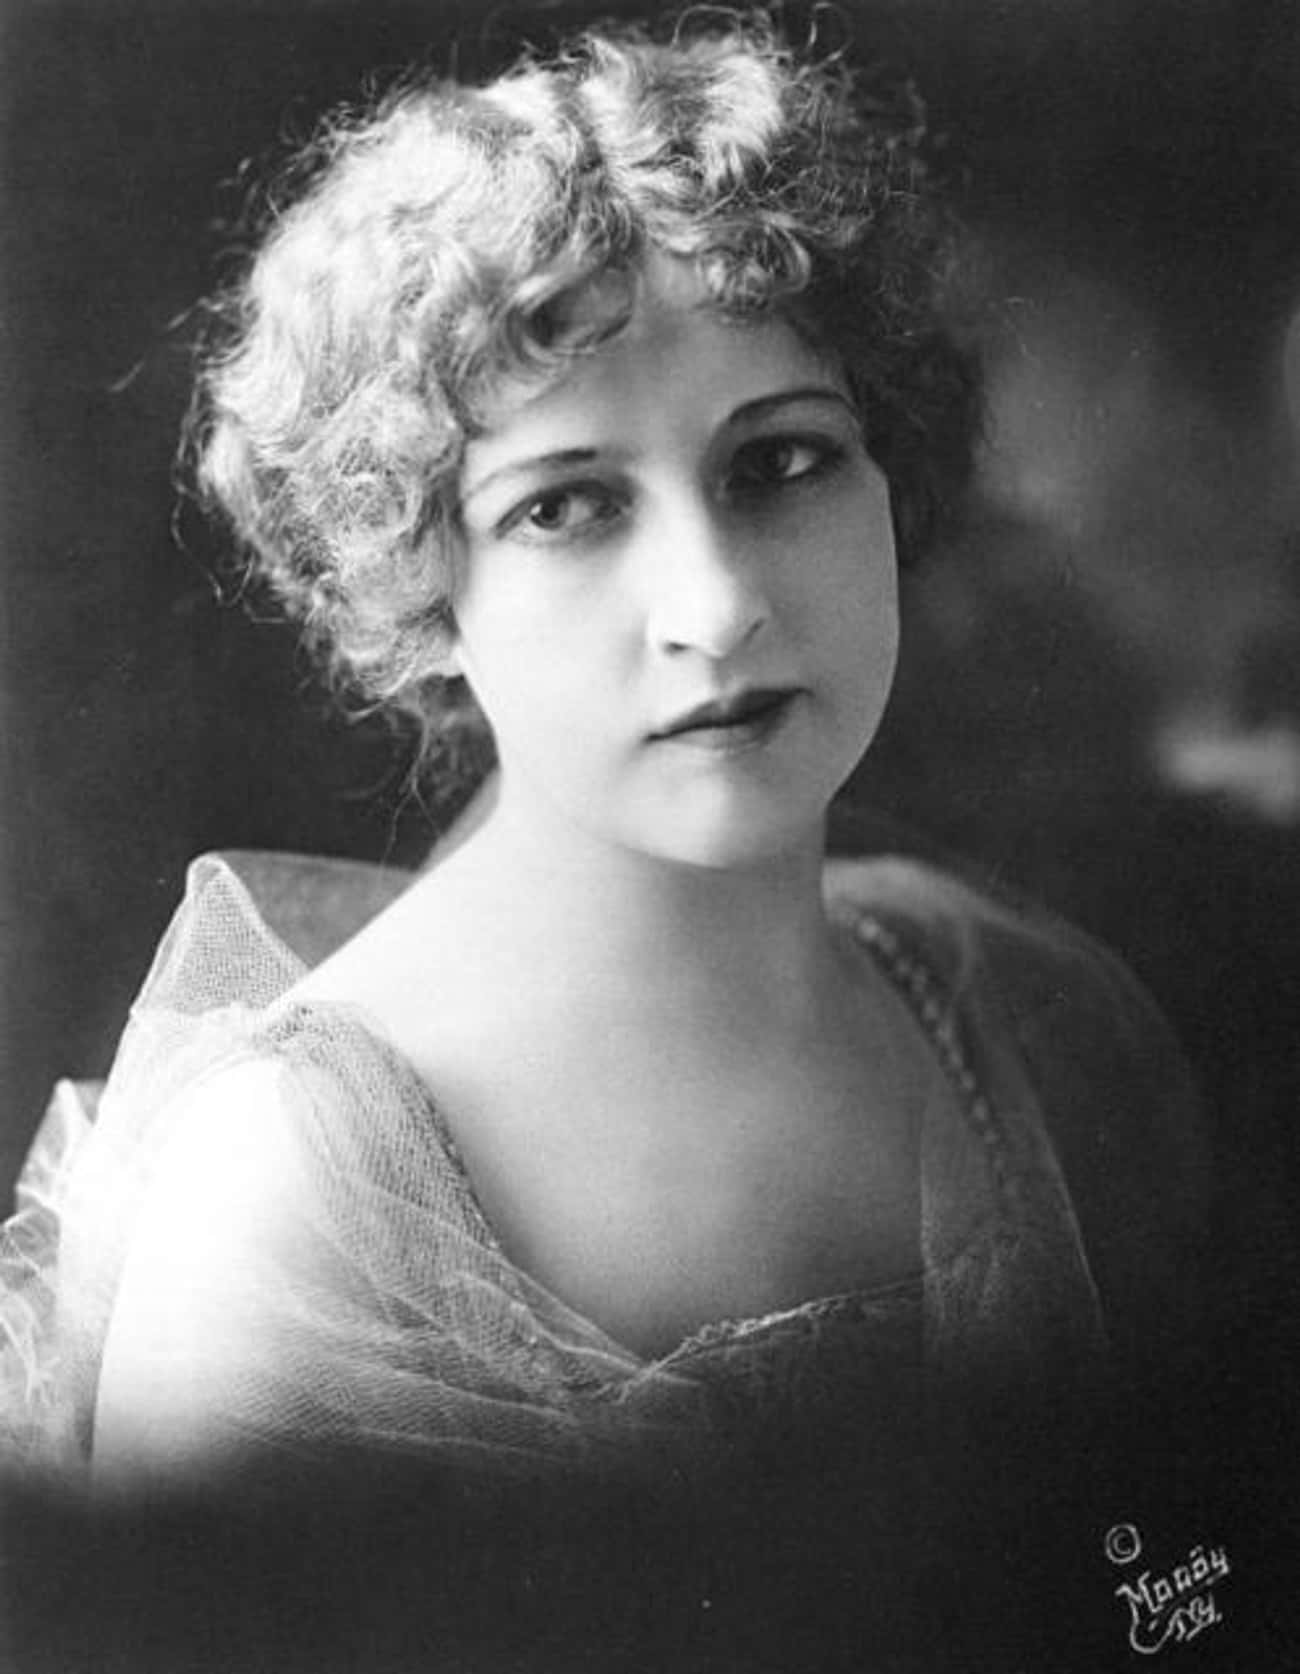 The Most Beautiful Women of the 1900s